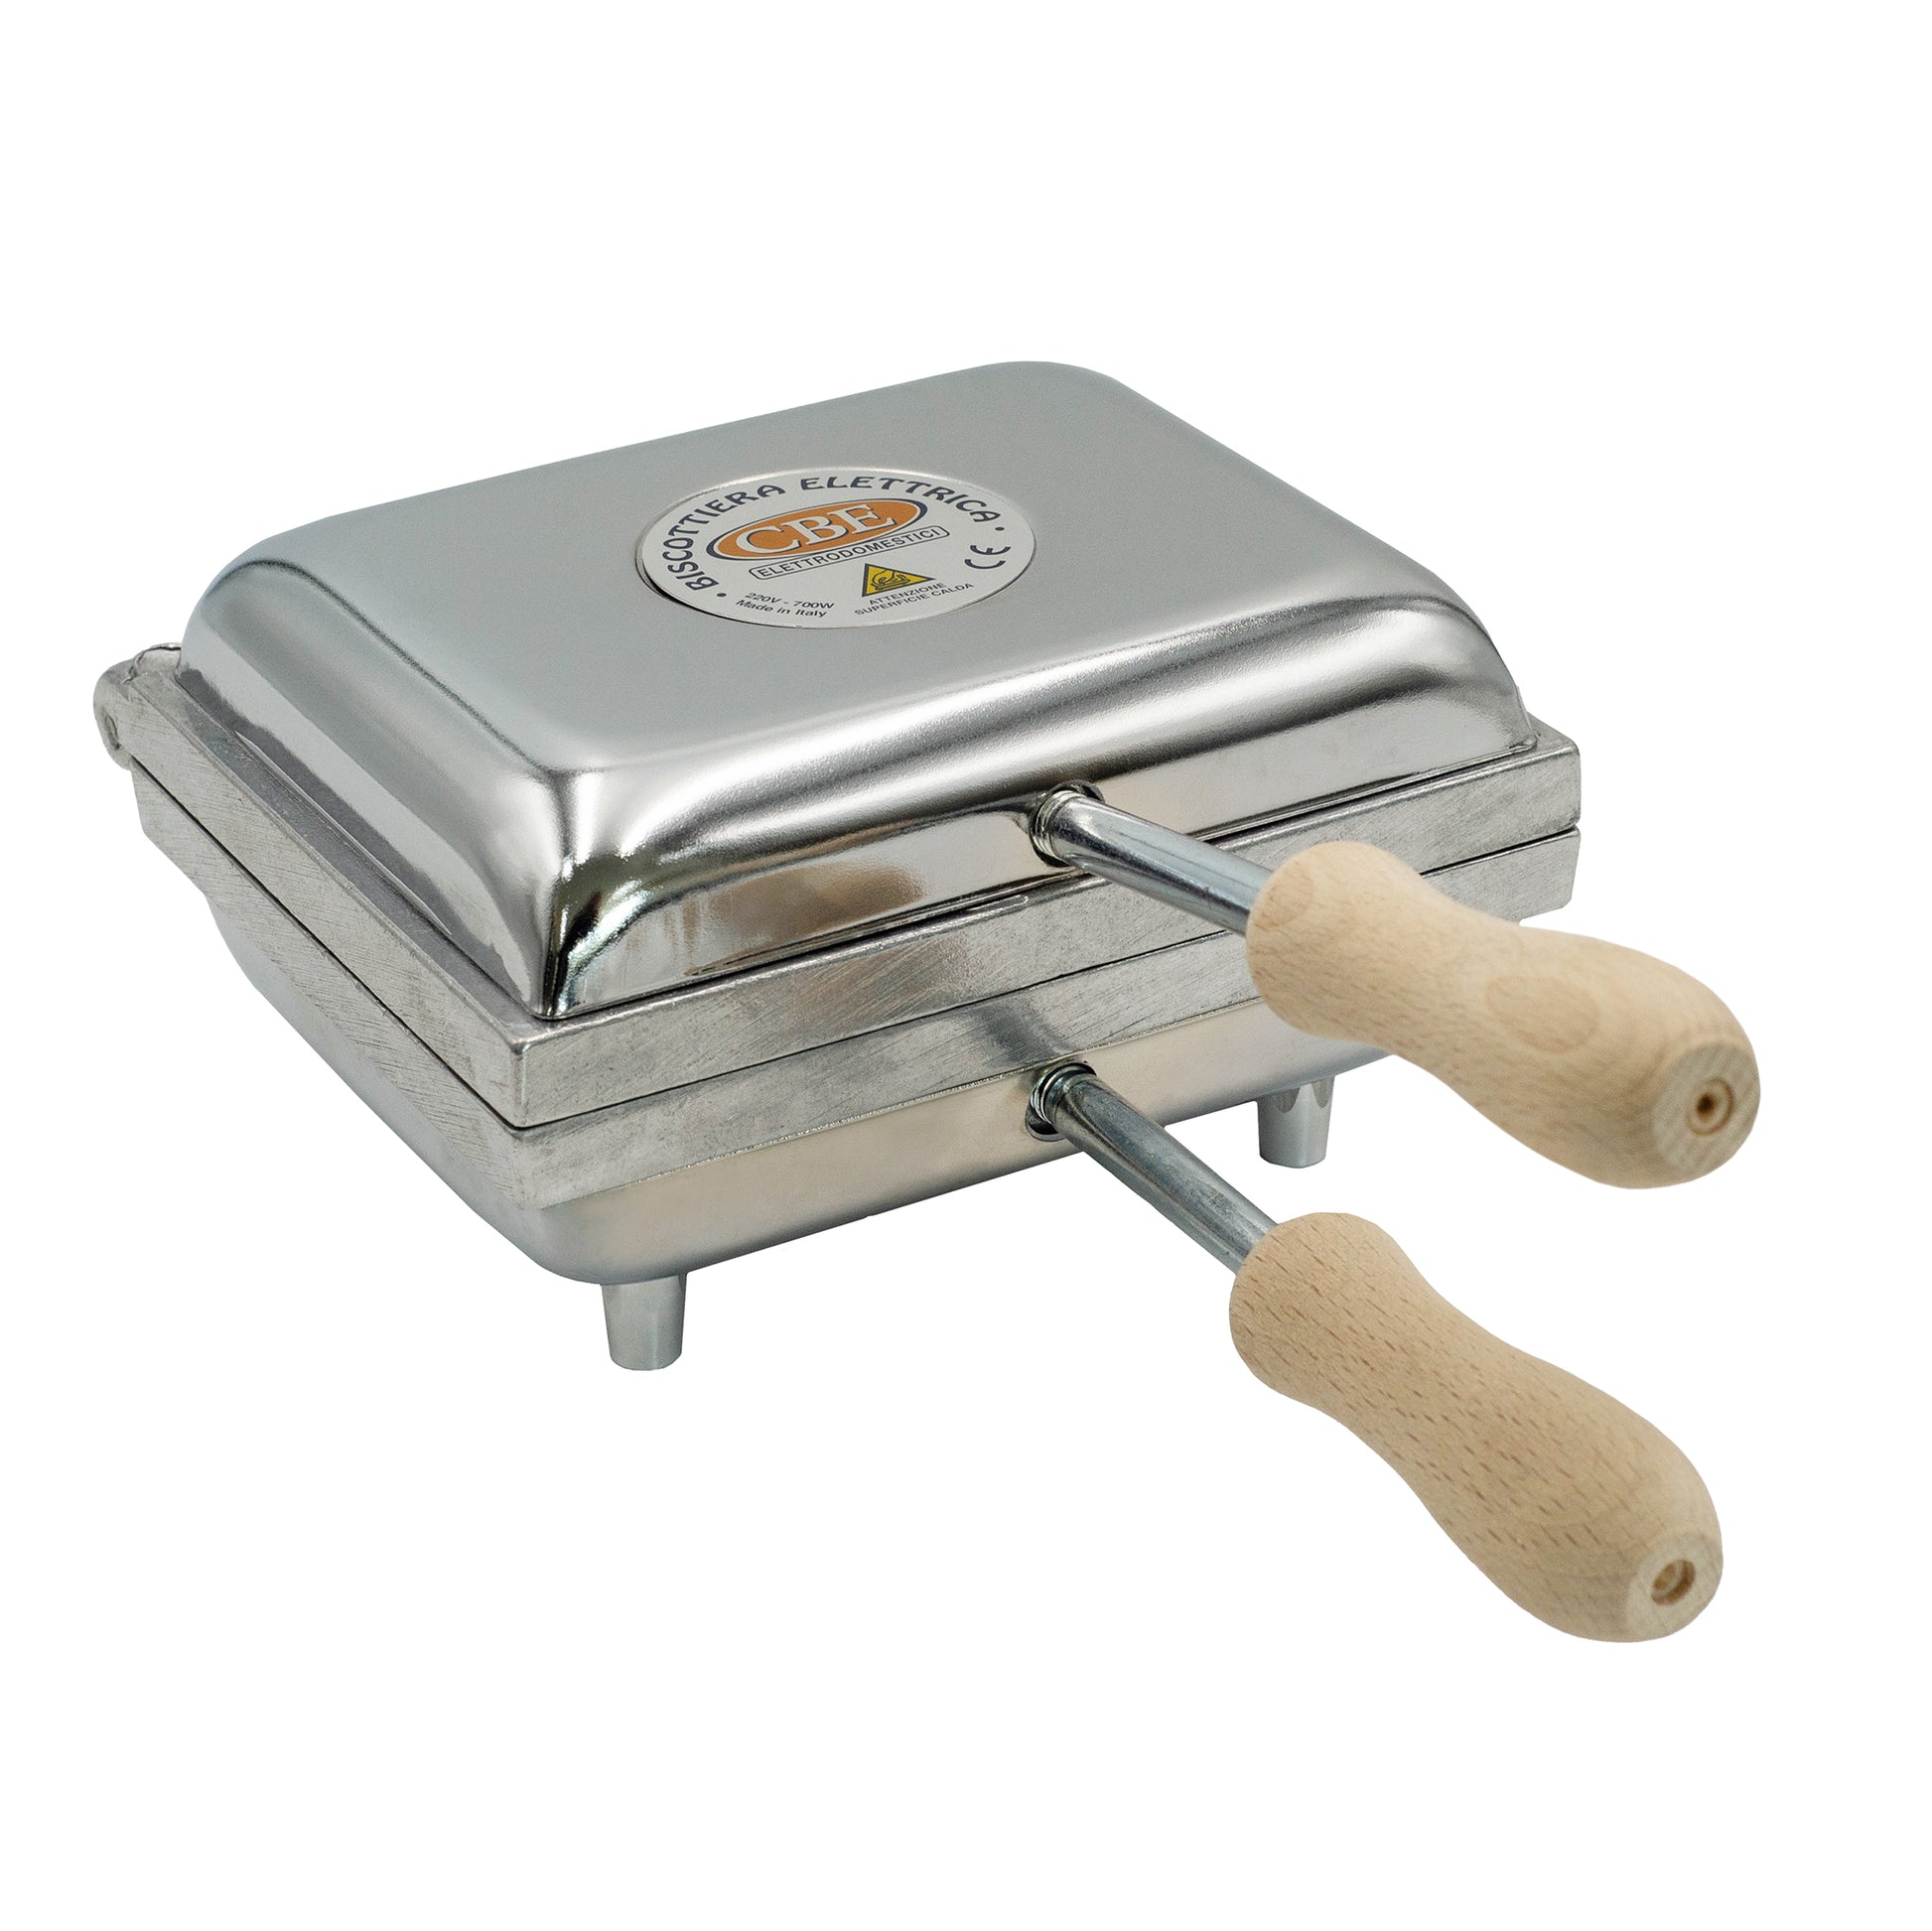 italian made electric pizzelle waffle maker, deep with two sections and wooden handles.